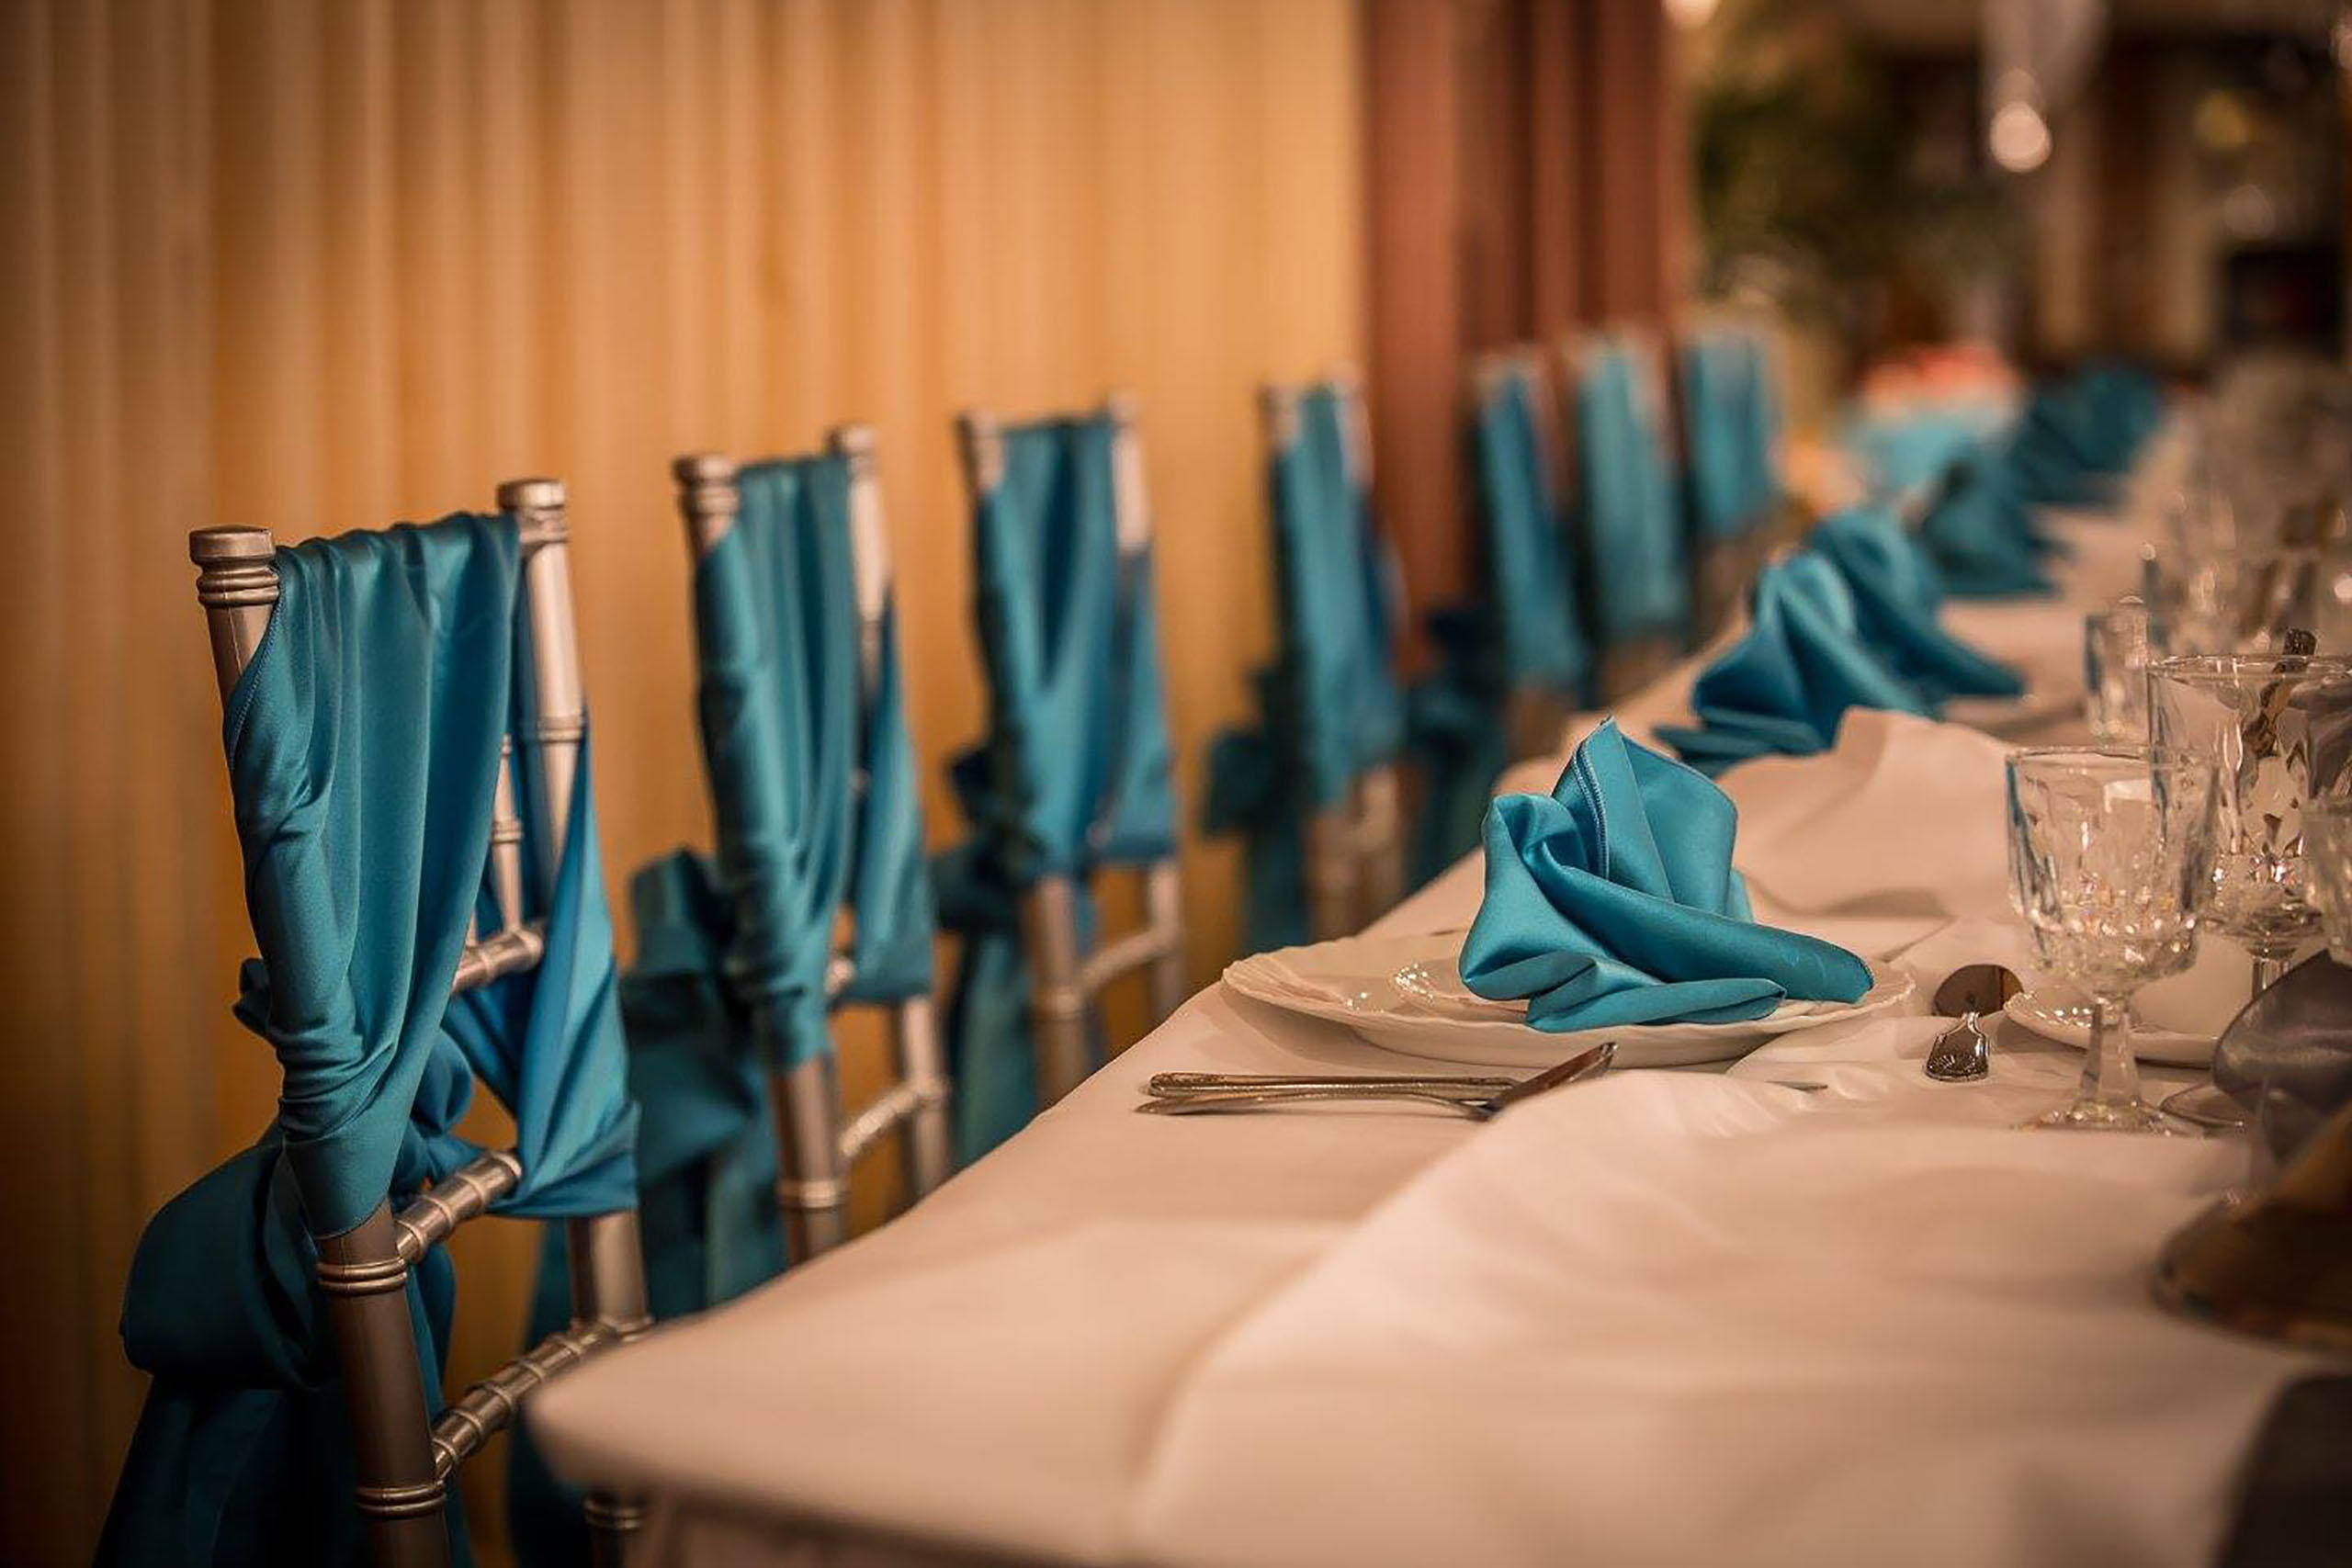 Lone Tree Manor Banquet Hall & Catering Photo